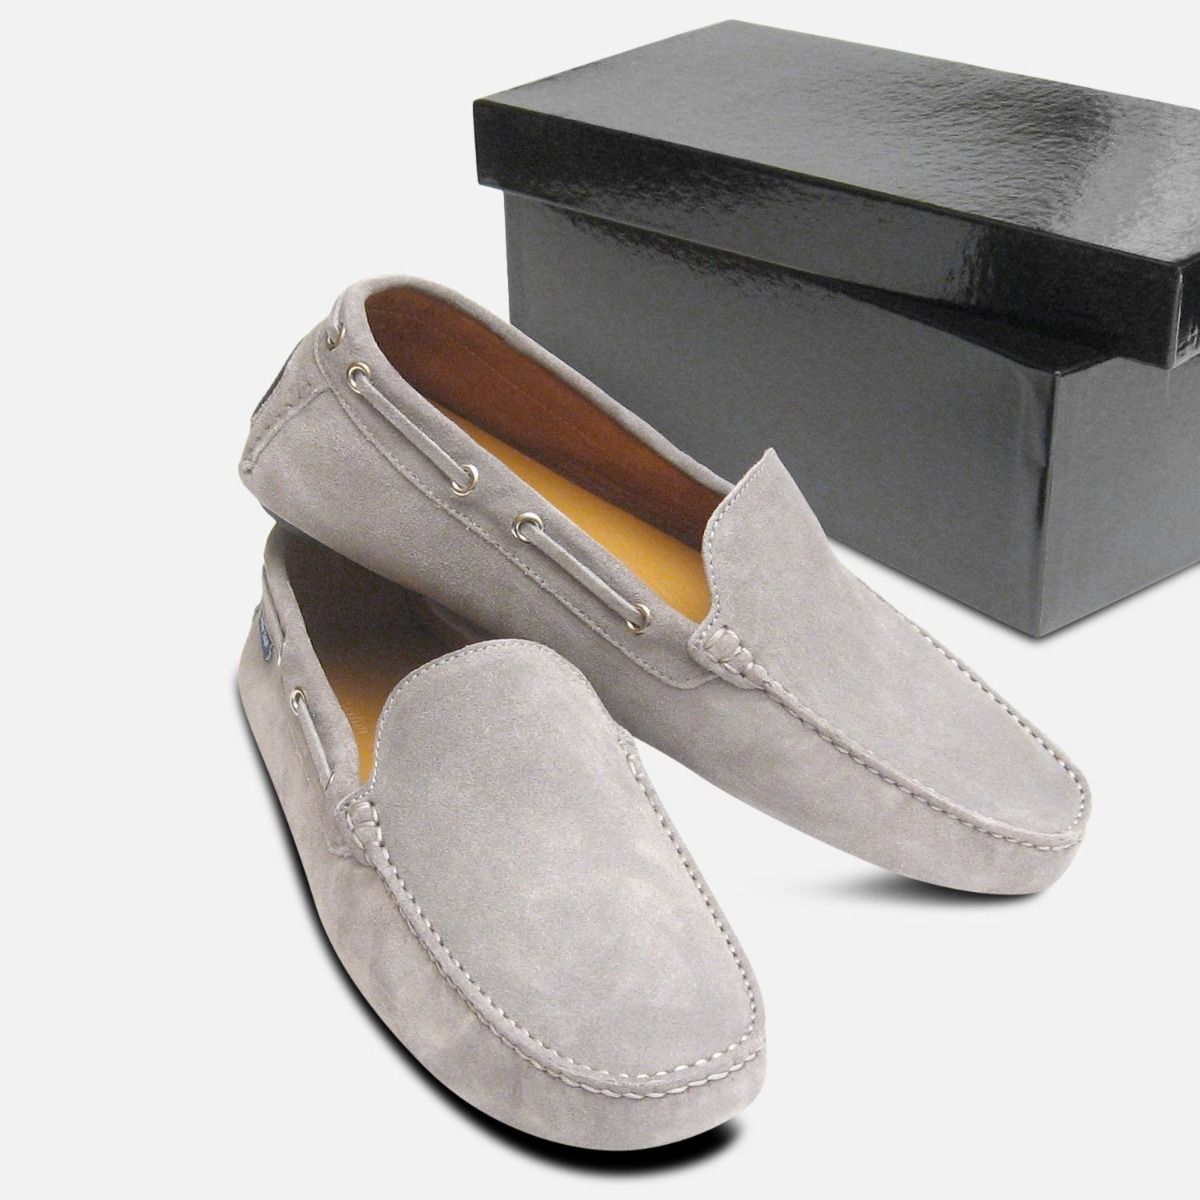 Light Grey Suede Mens Driving Shoes